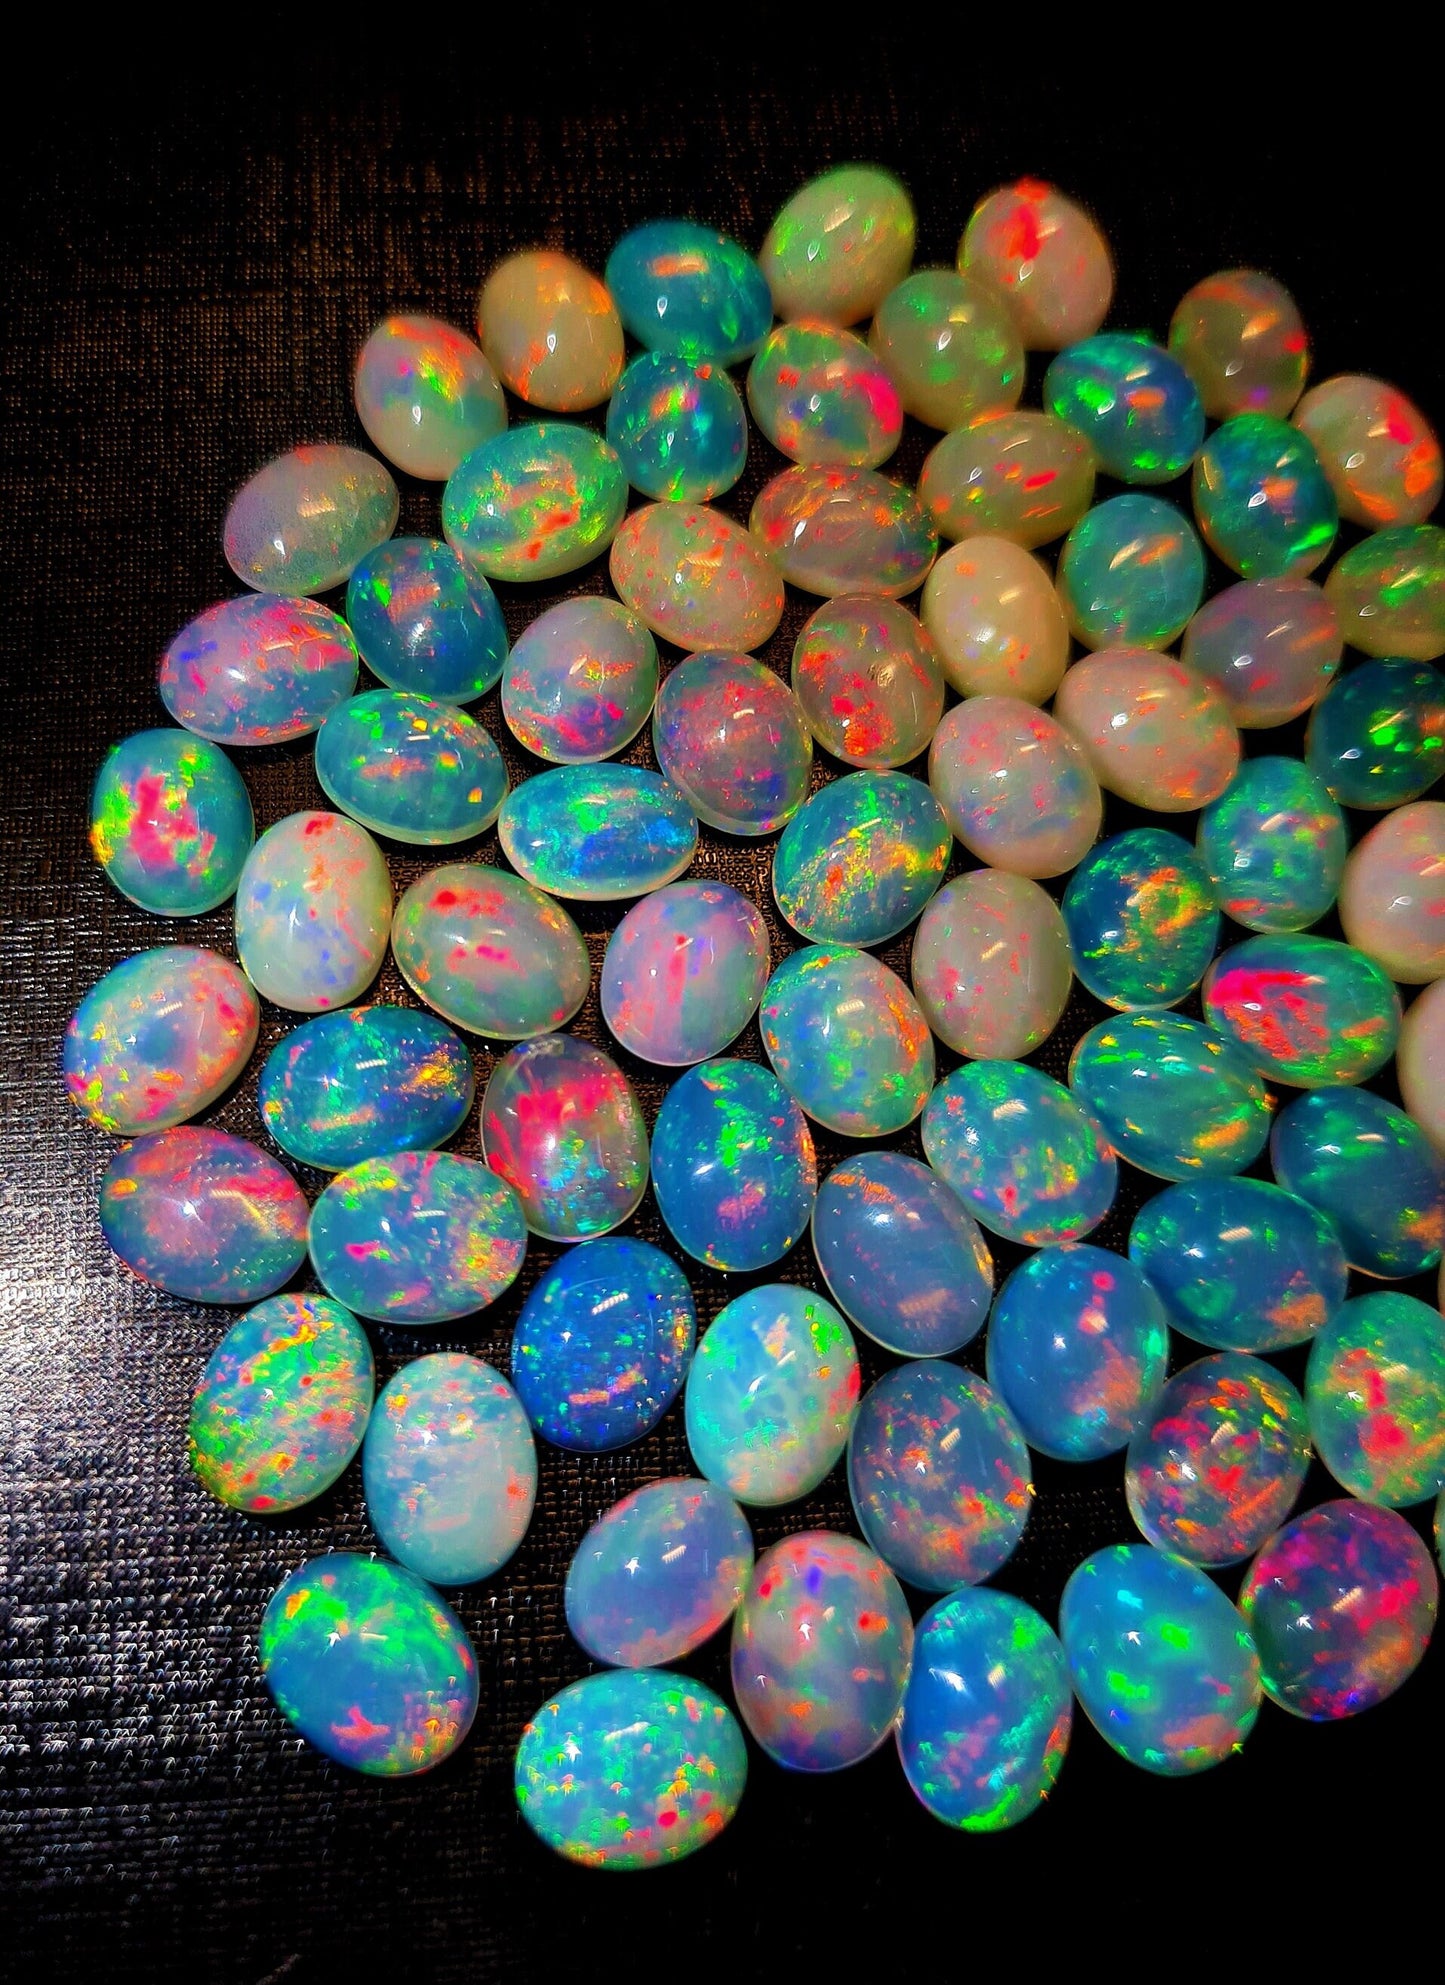 AAA Quality Natural Ethiopian Opal 7x9 mm Oval Gemstone Cabochon, Calibrated Opal Stone, Multi Fire Opal Loose Stone For Jewelry Making.